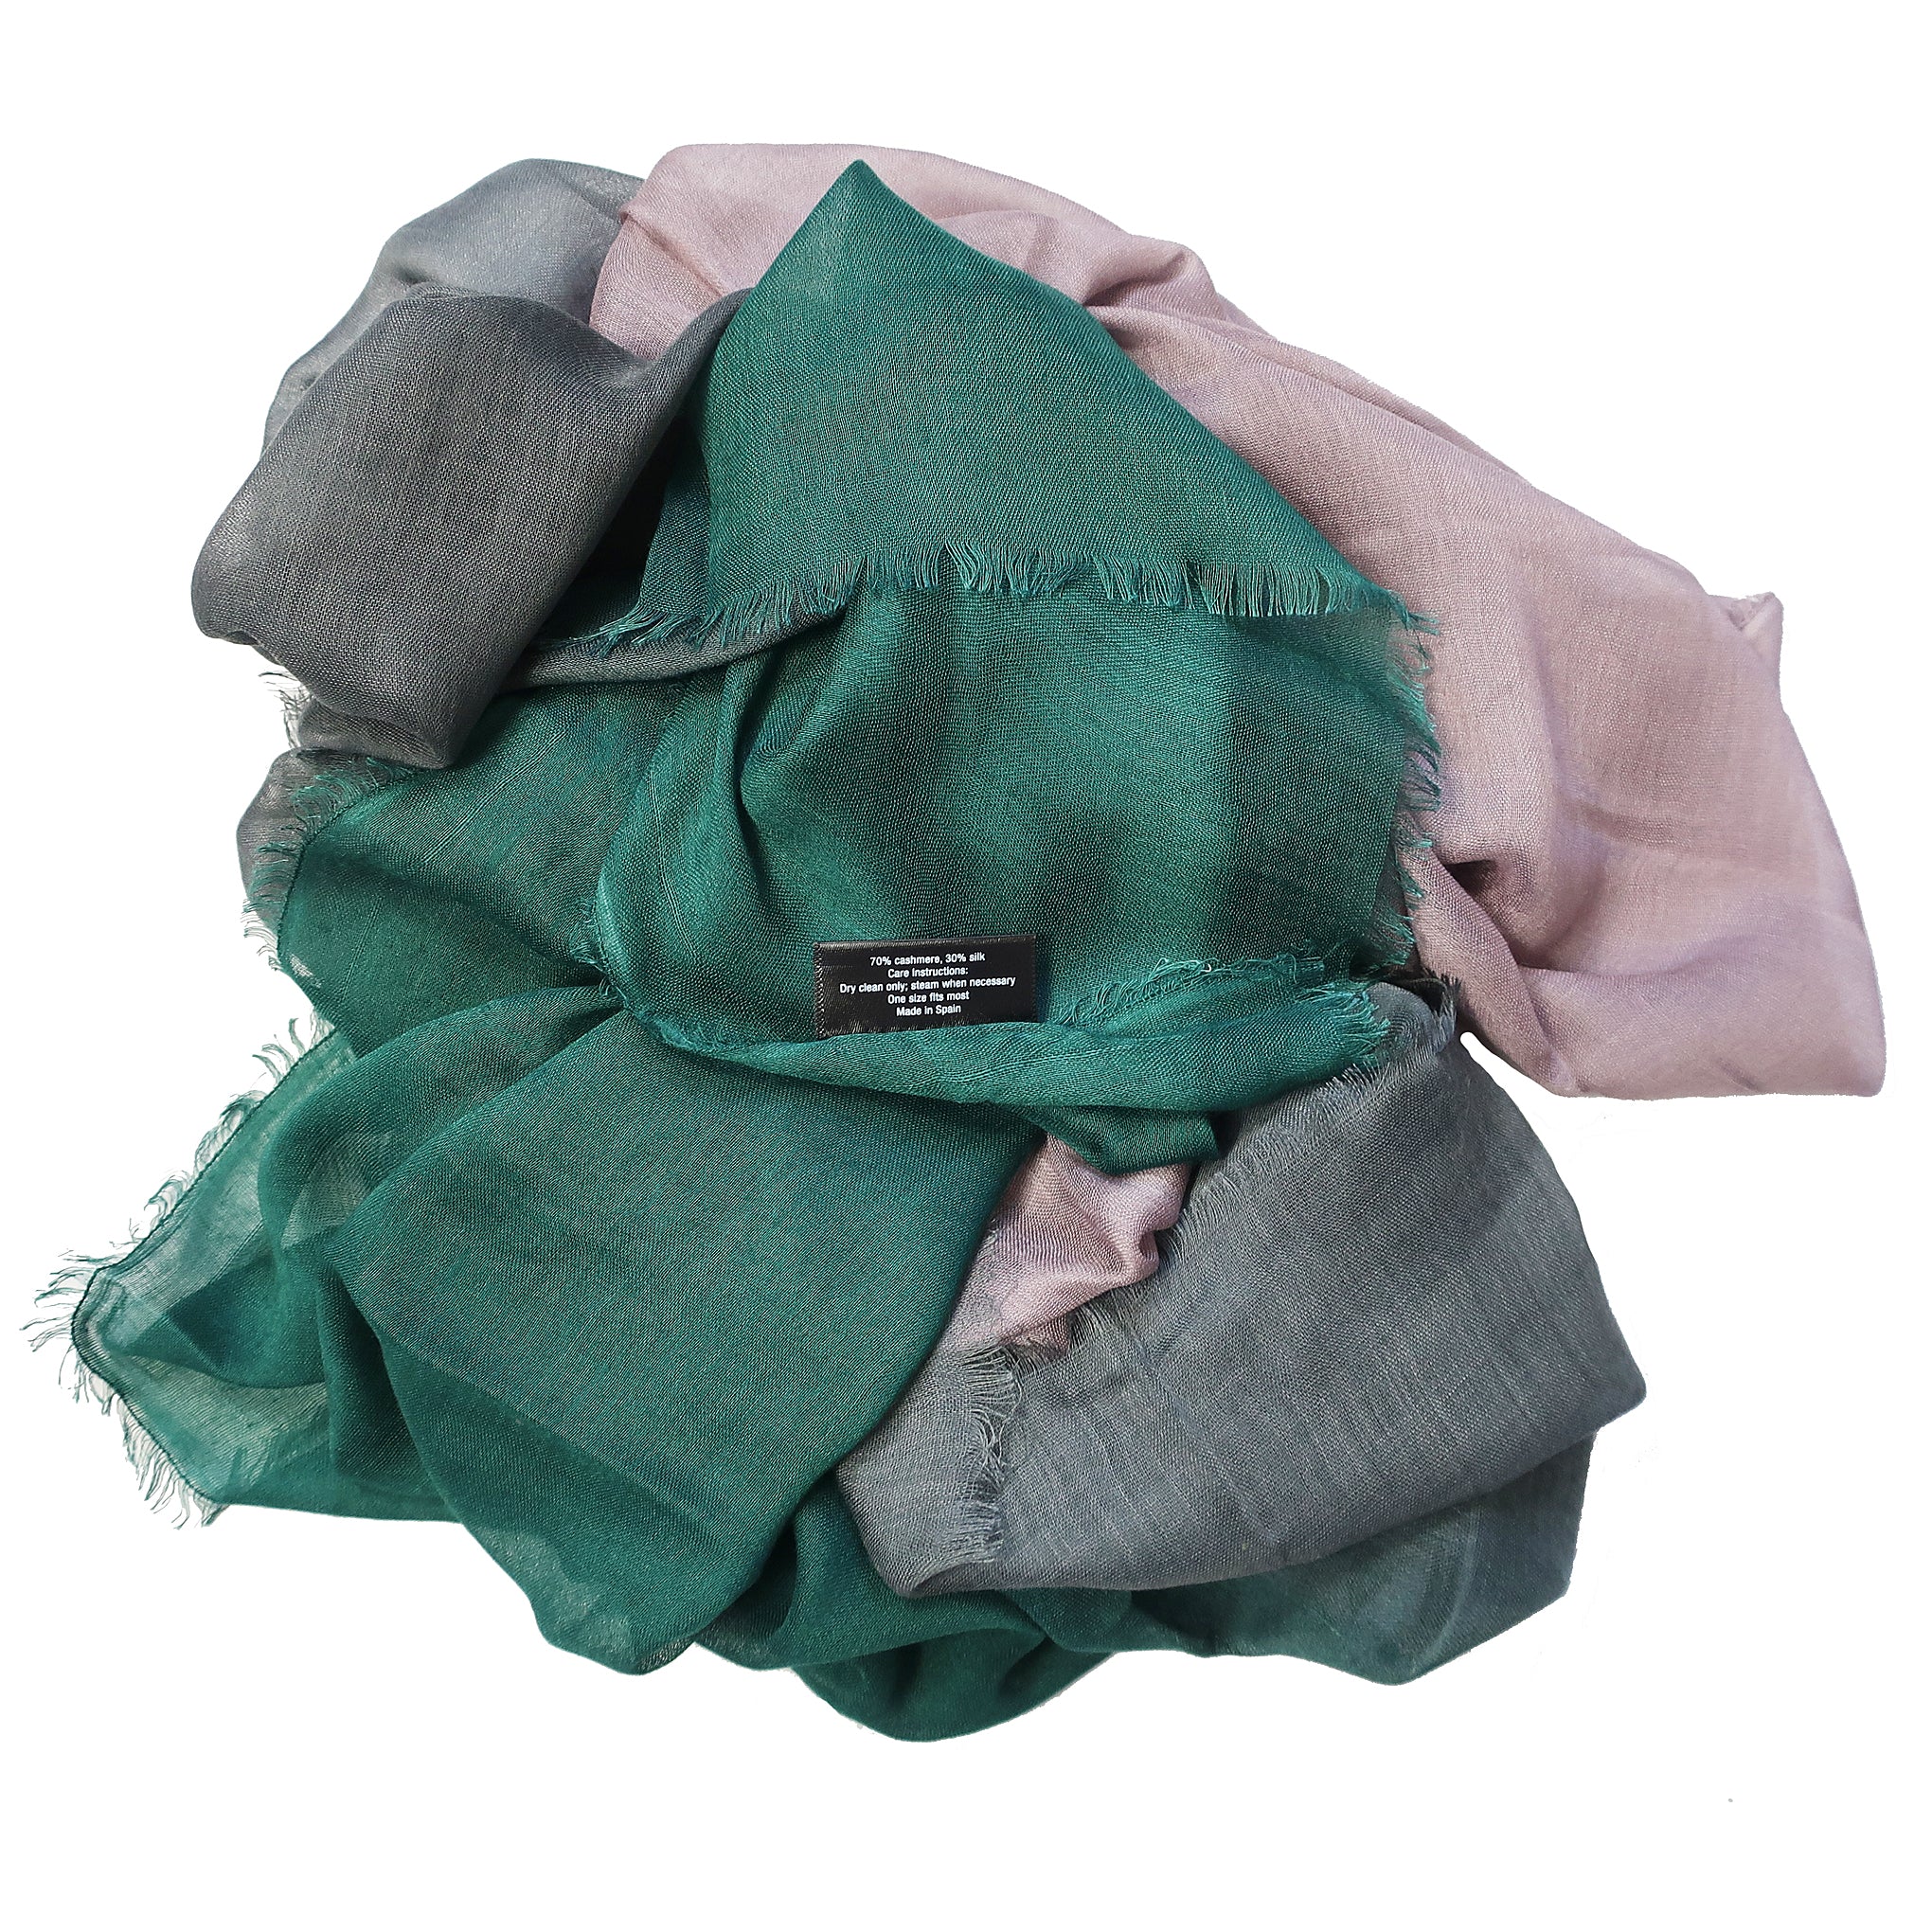 Blue Pacific Dream Cashmere and Silk Scarf in Teal, Slate, and Pink 47 x 37